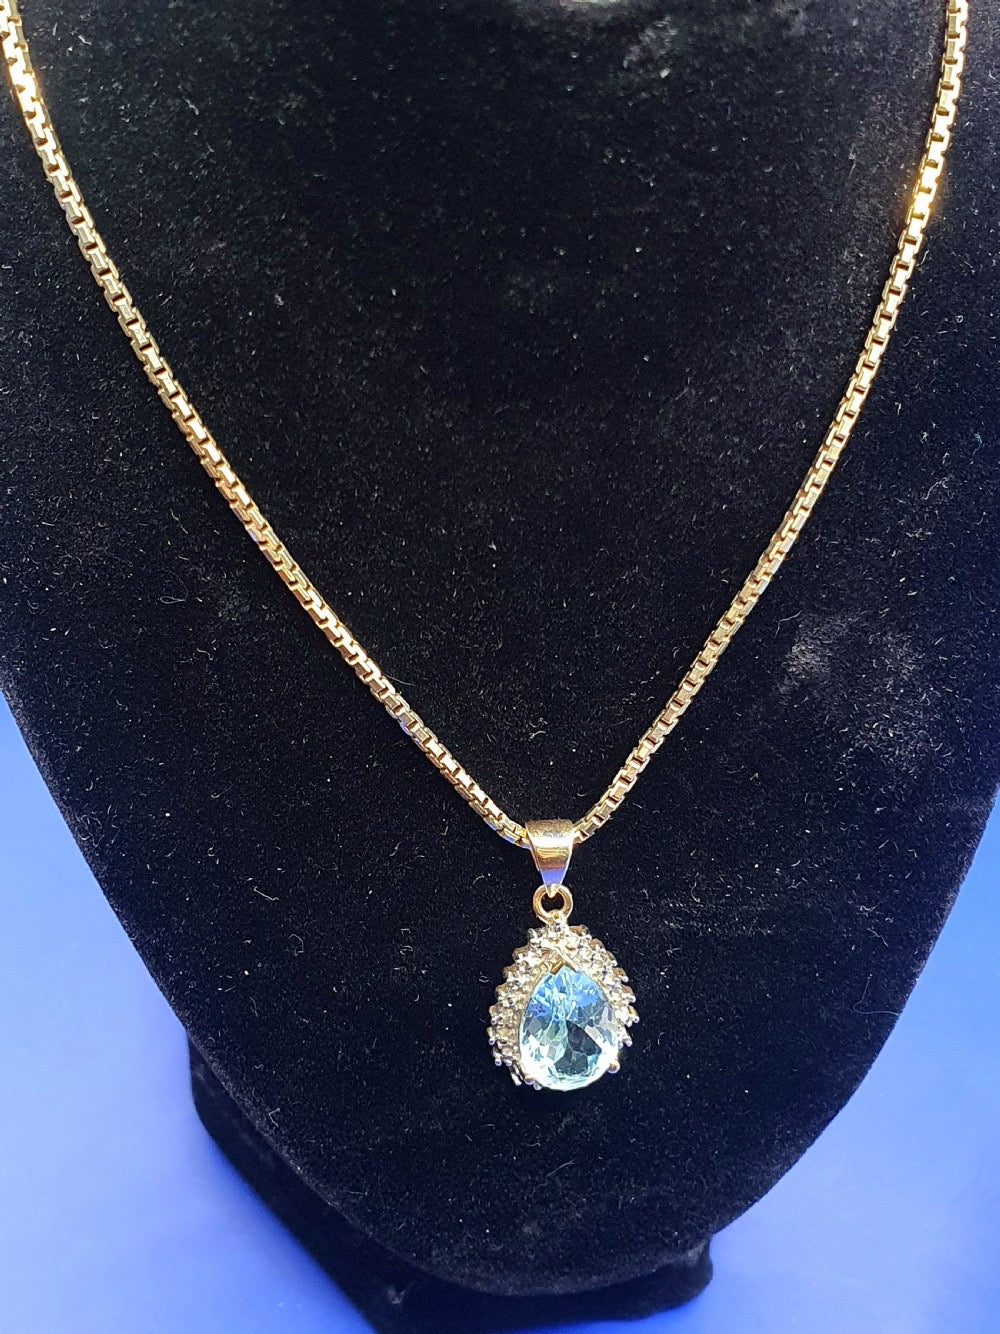 Pear Cut Blue Topaz With Diamond Halo on 9ct Gold Pendant